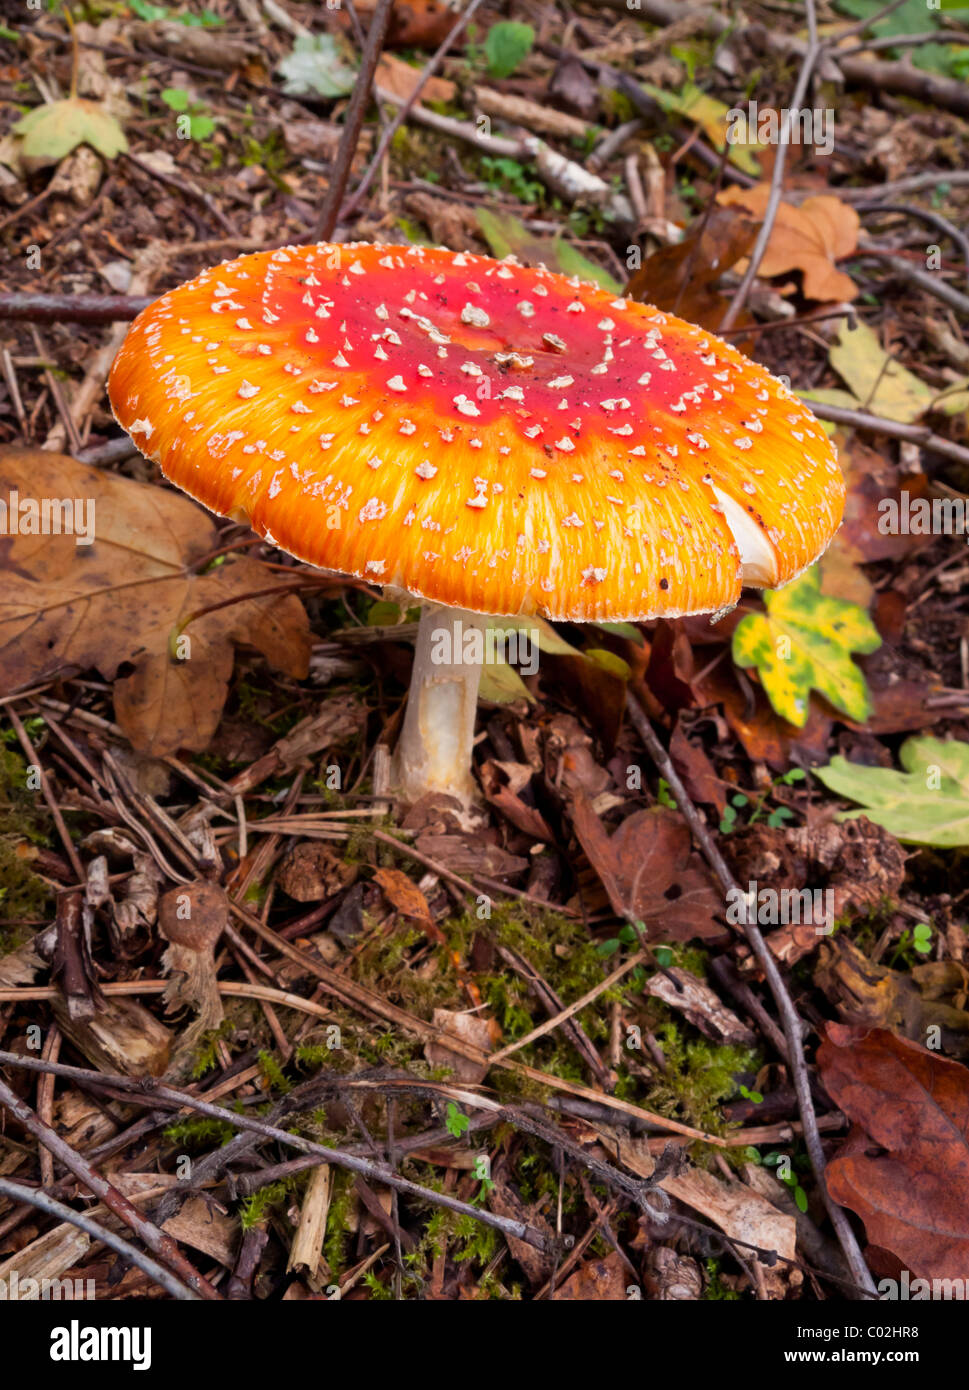 Amanita muscaria, commonly known as the fly agaric toadstool a poisonous and psychoactive basidiomycete fungus Stock Photo